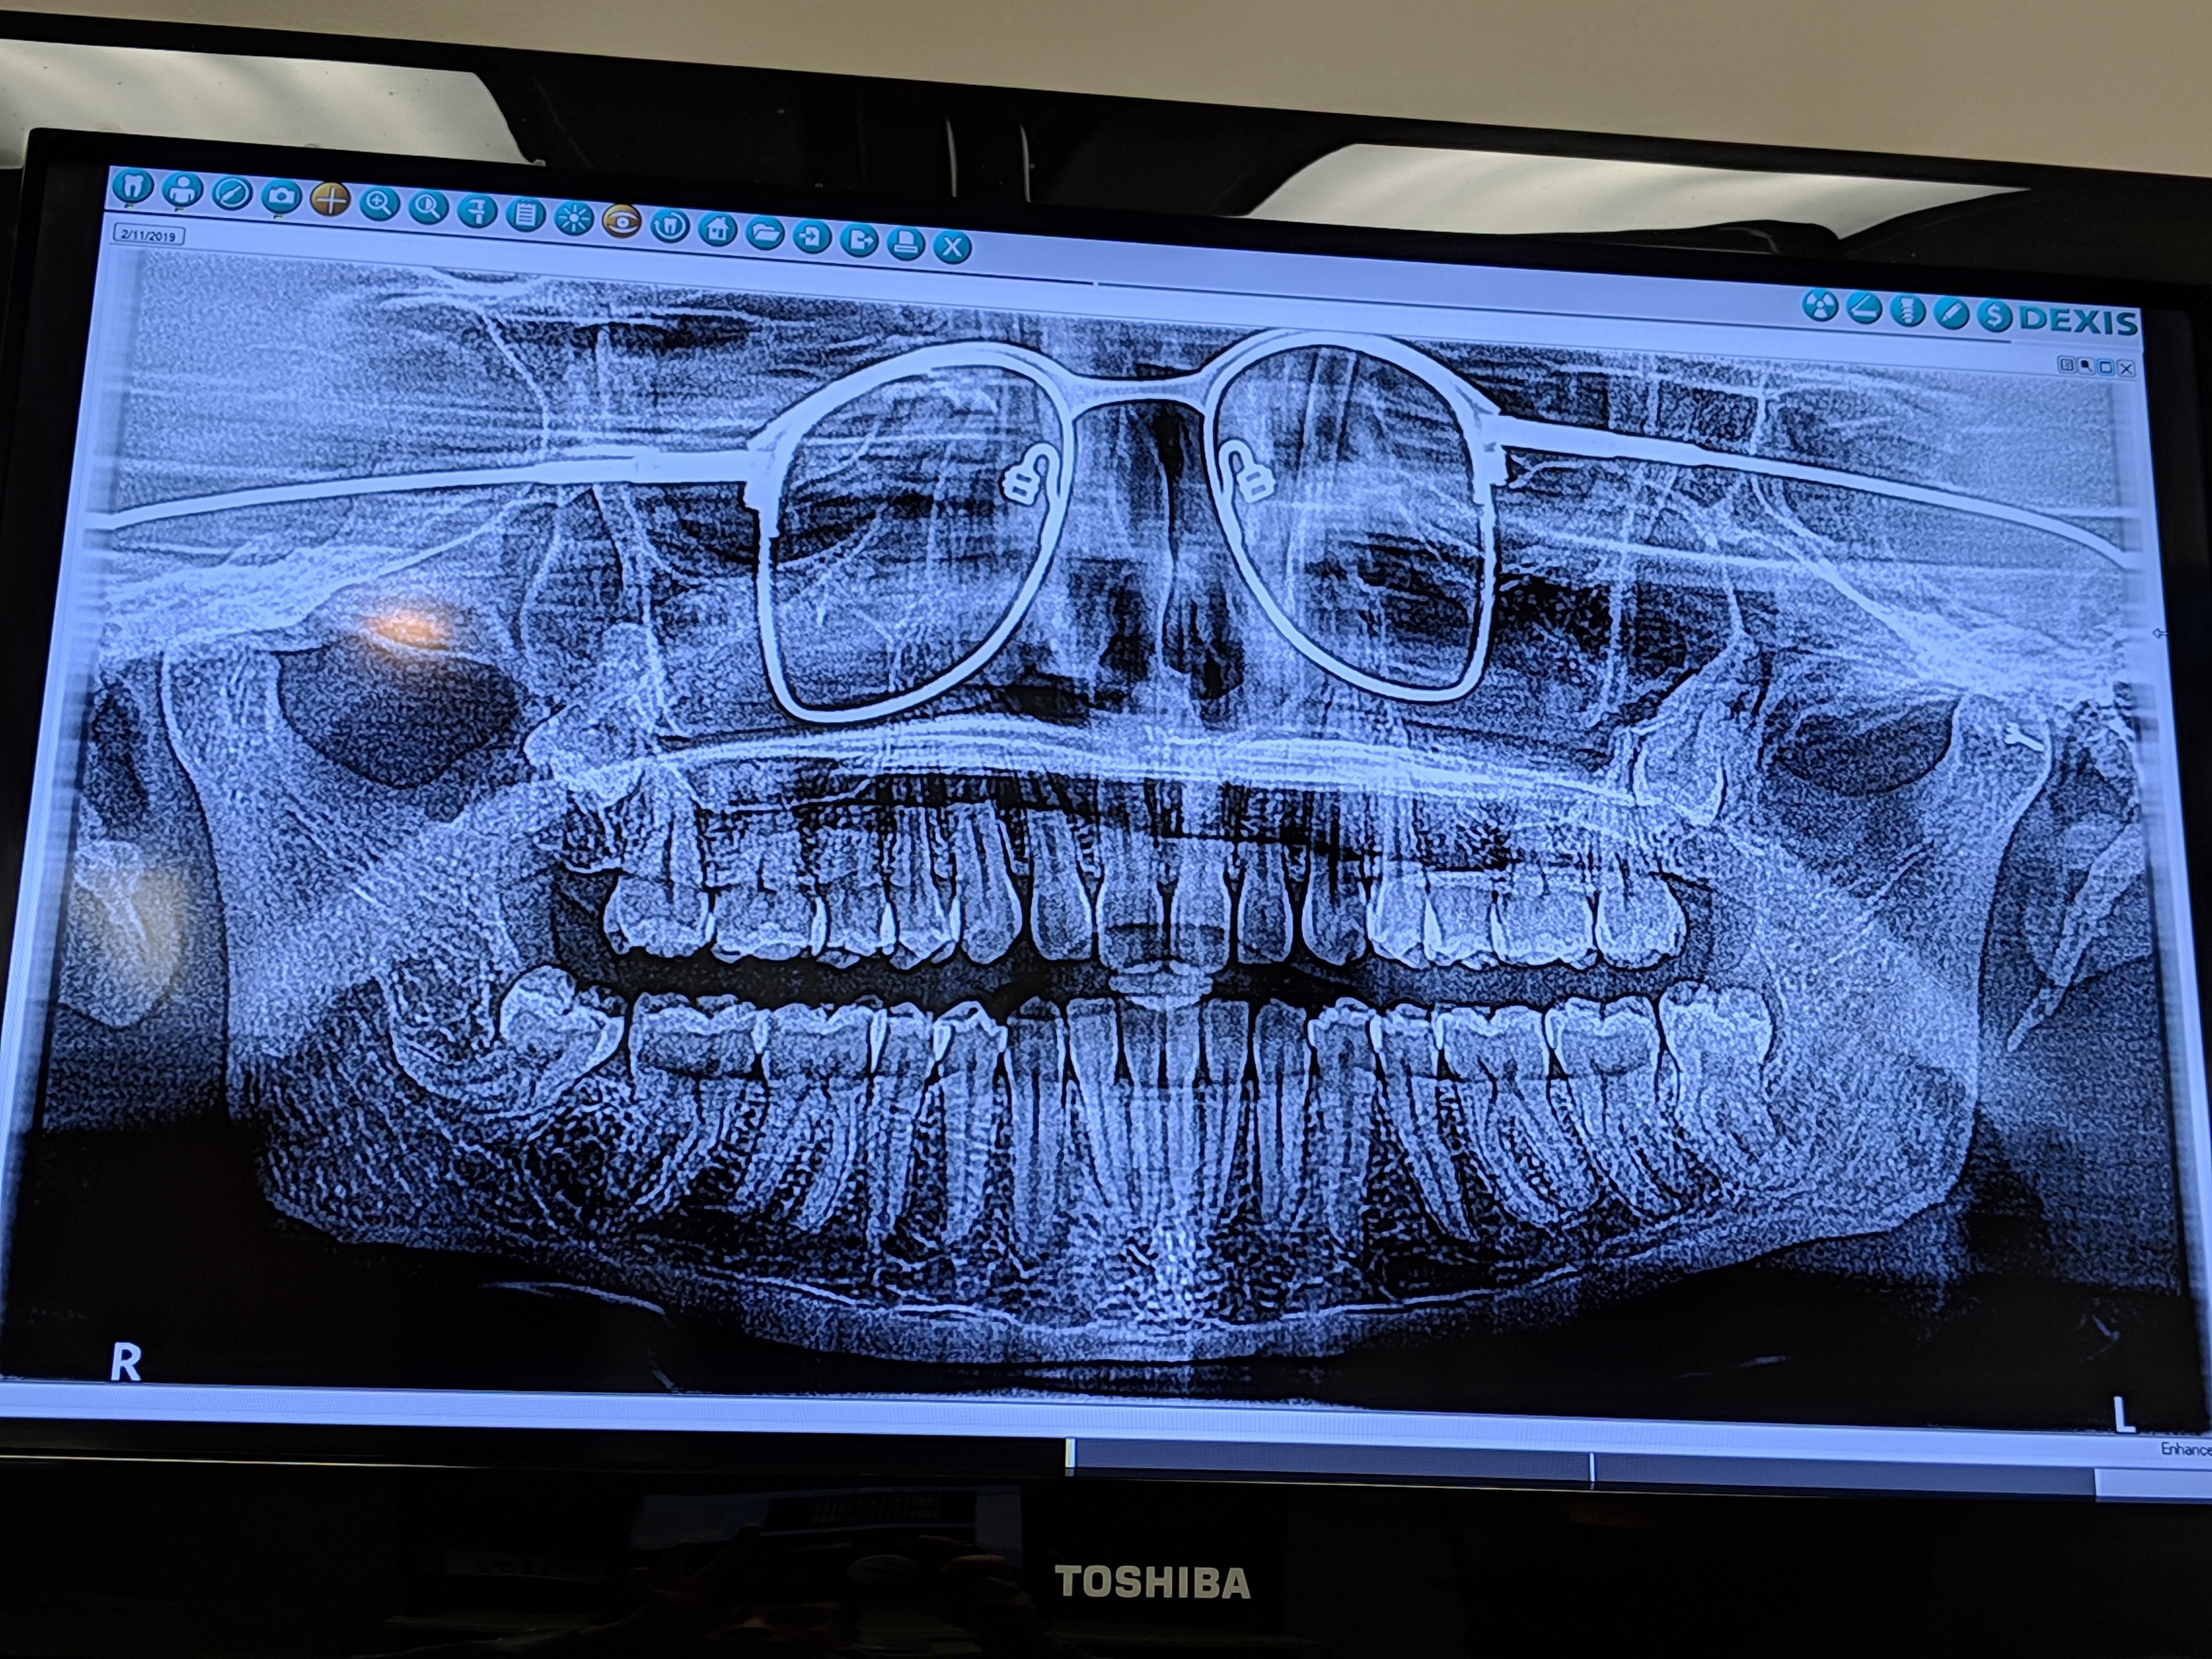 I got a panoramic xray of my teeth the other day. The dentist forgot to have me remove my glasses.